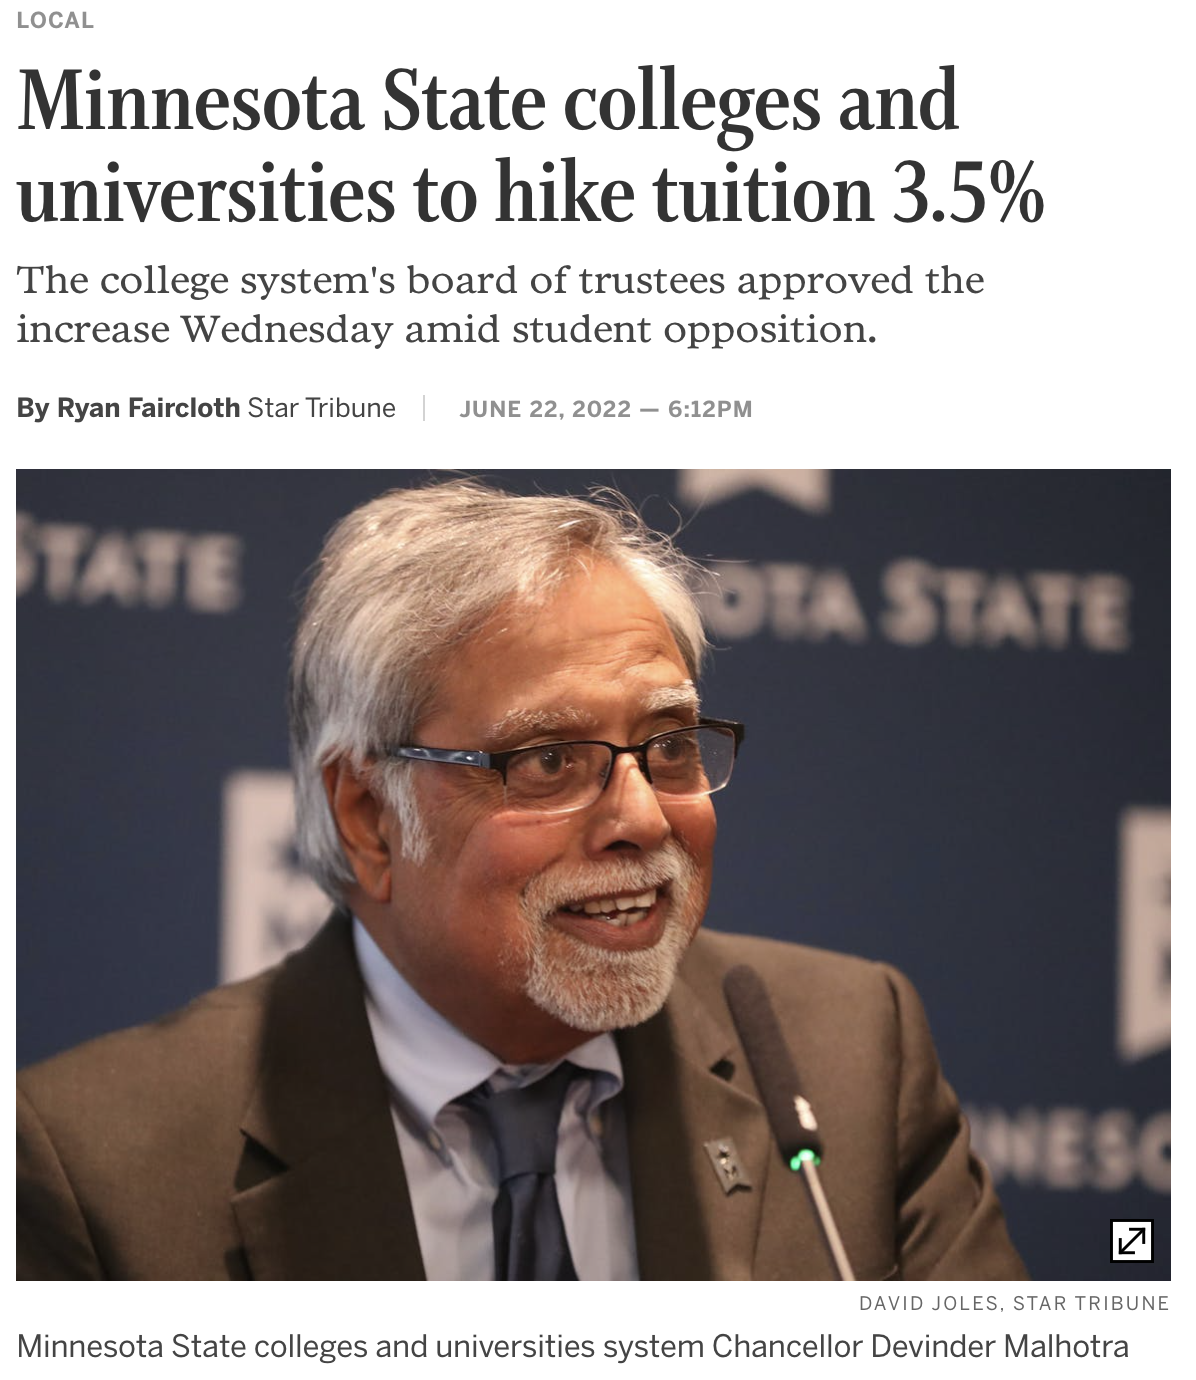 screenshot of news article from the Star Tribune reads "Minnesota State colleges and universities to hike tuition 3.5% The college system's board of trustees approved the increase Wednesday amid student opposition." 